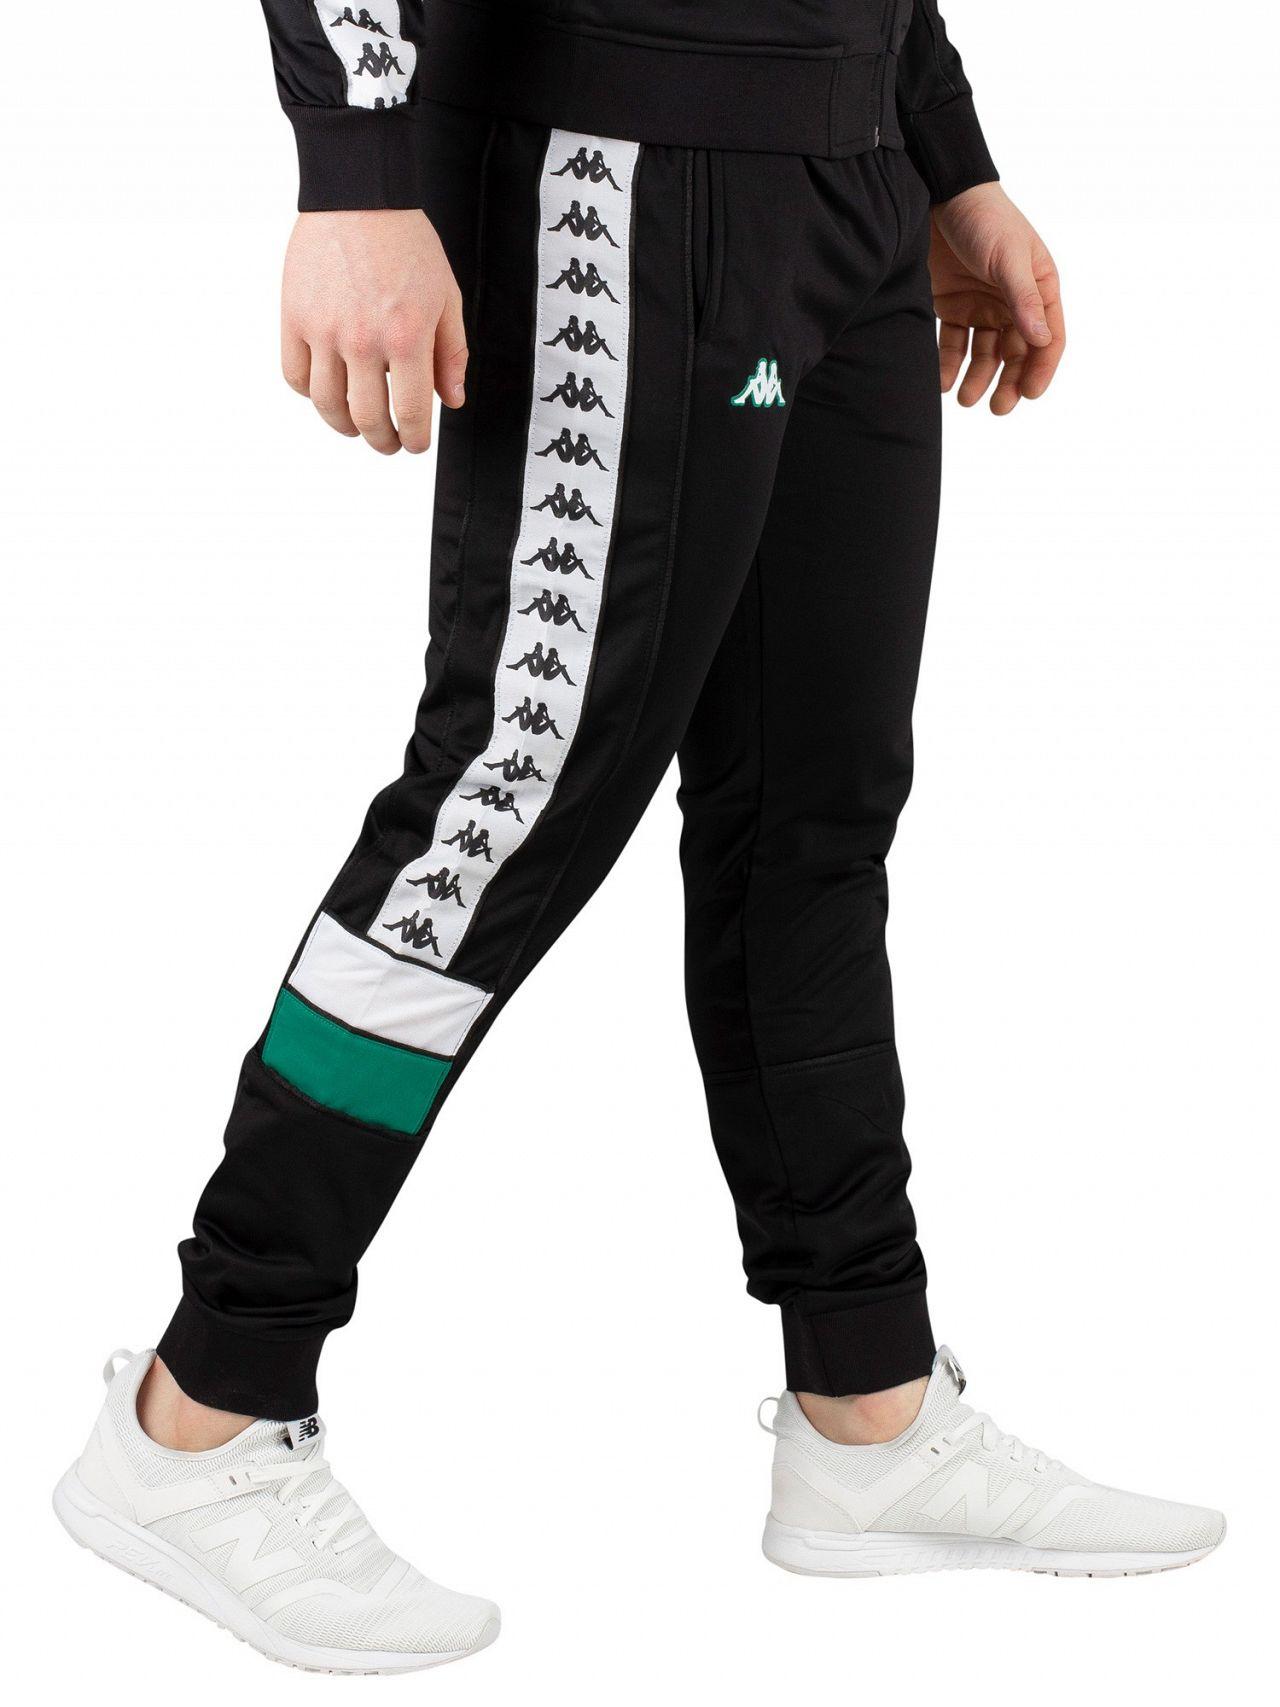 green kappa sweatpants for Sale,Up To OFF 76%